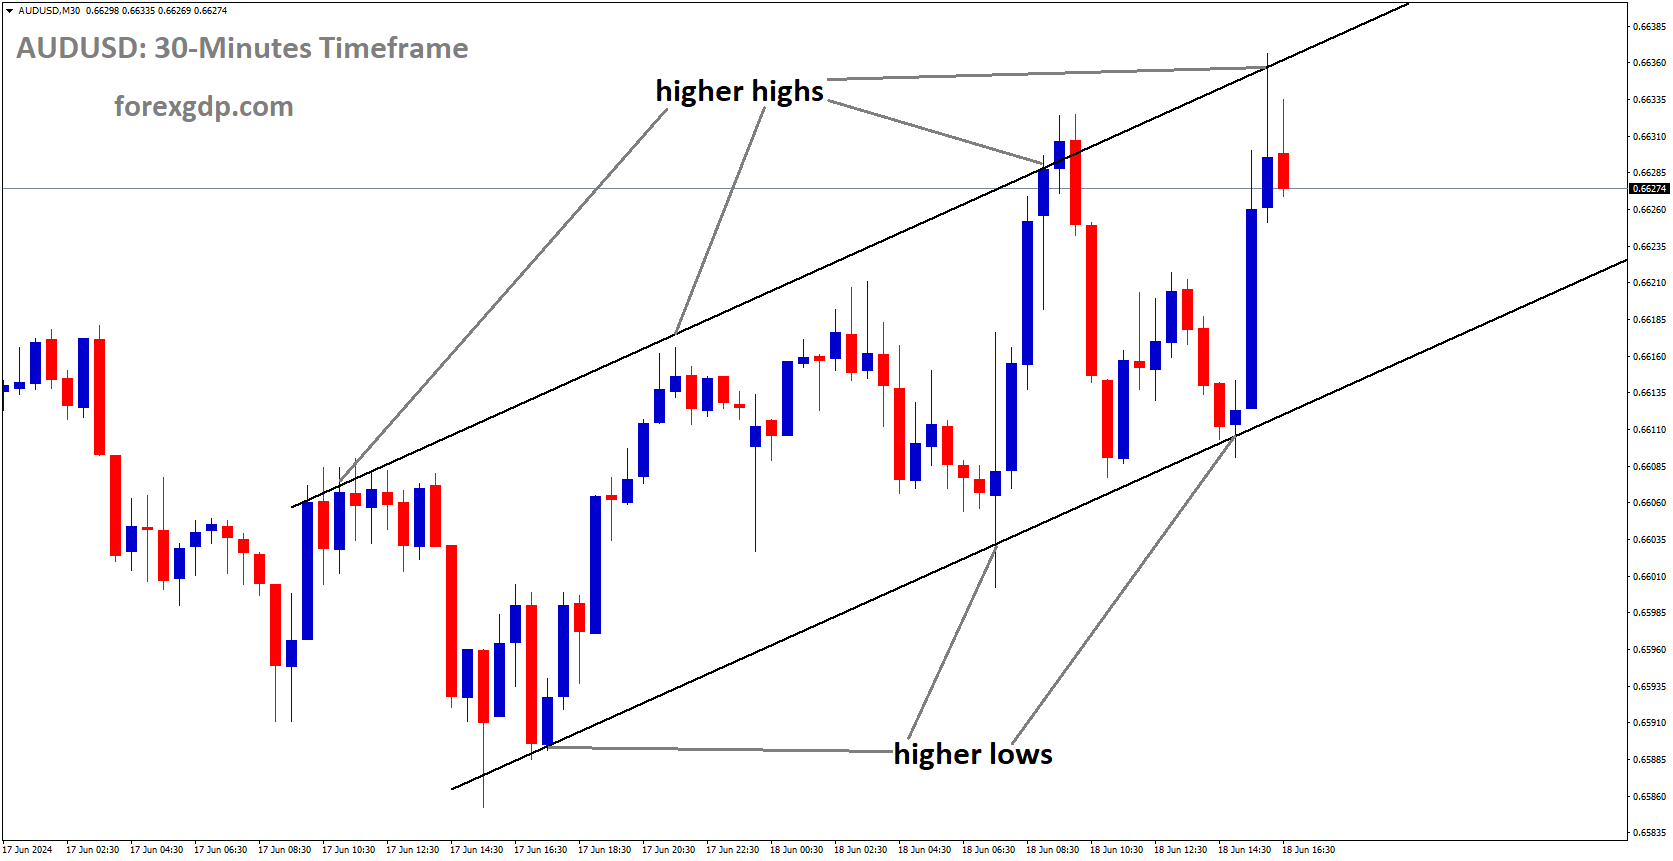 AUDUSD is moving in Ascending channel and market has fallen from the higher high area of the channel